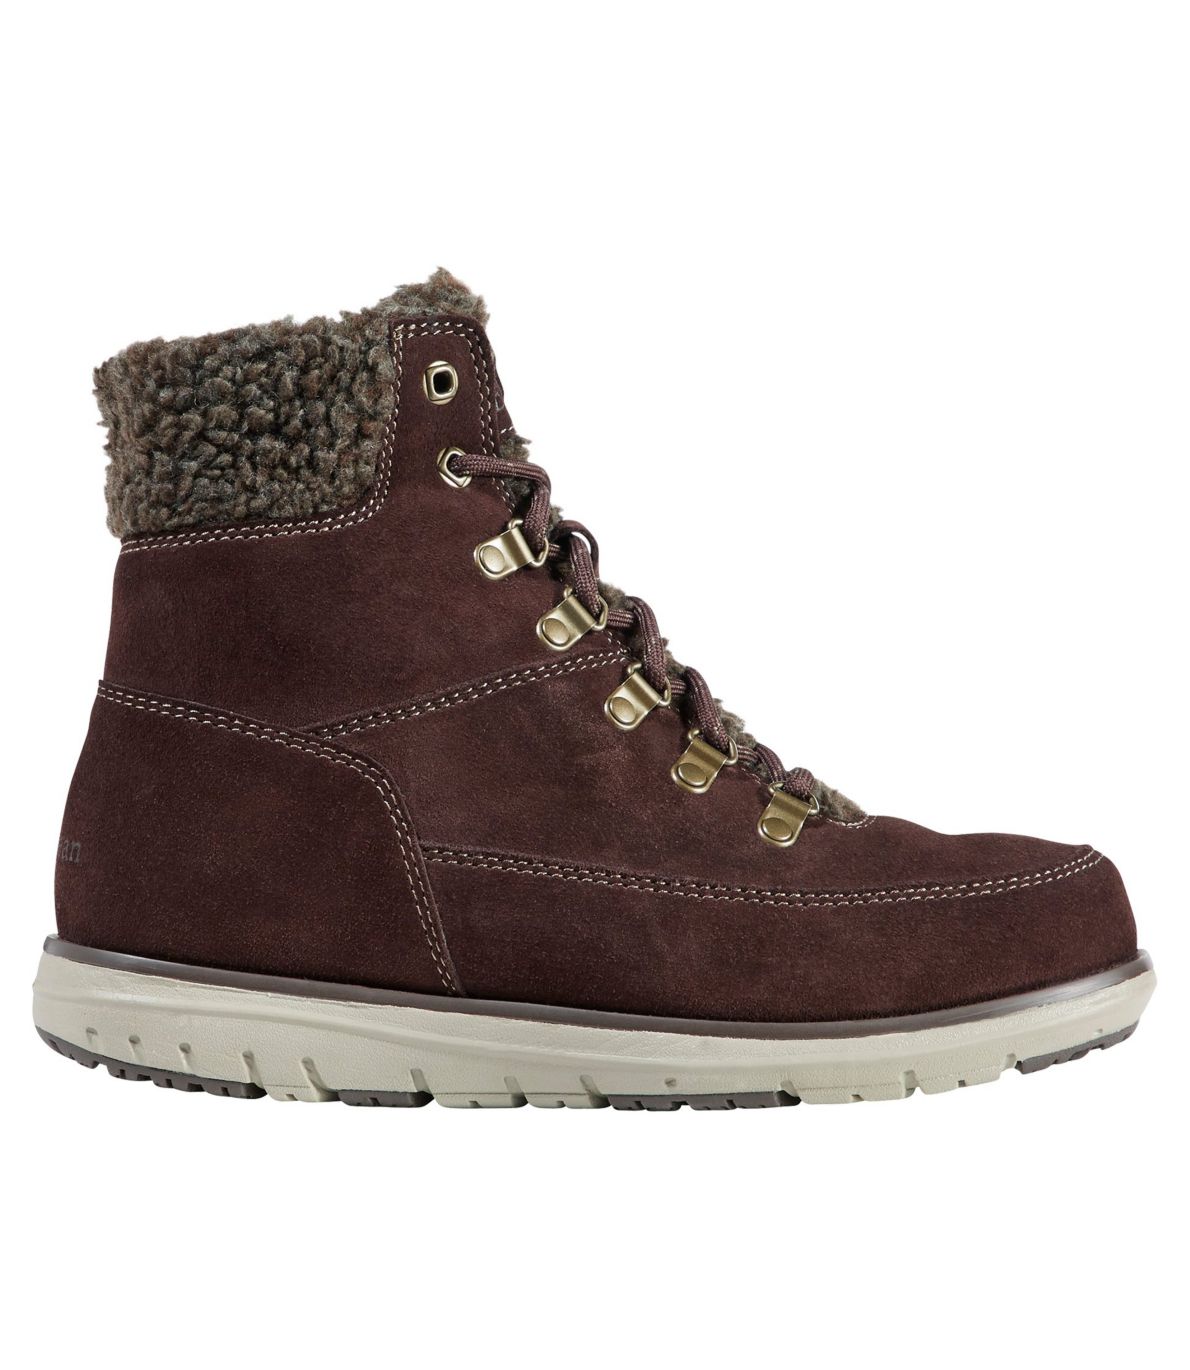 Women's Mountain Lodge Boots, Sherpa Insulated Lace-Up at L.L. Bean